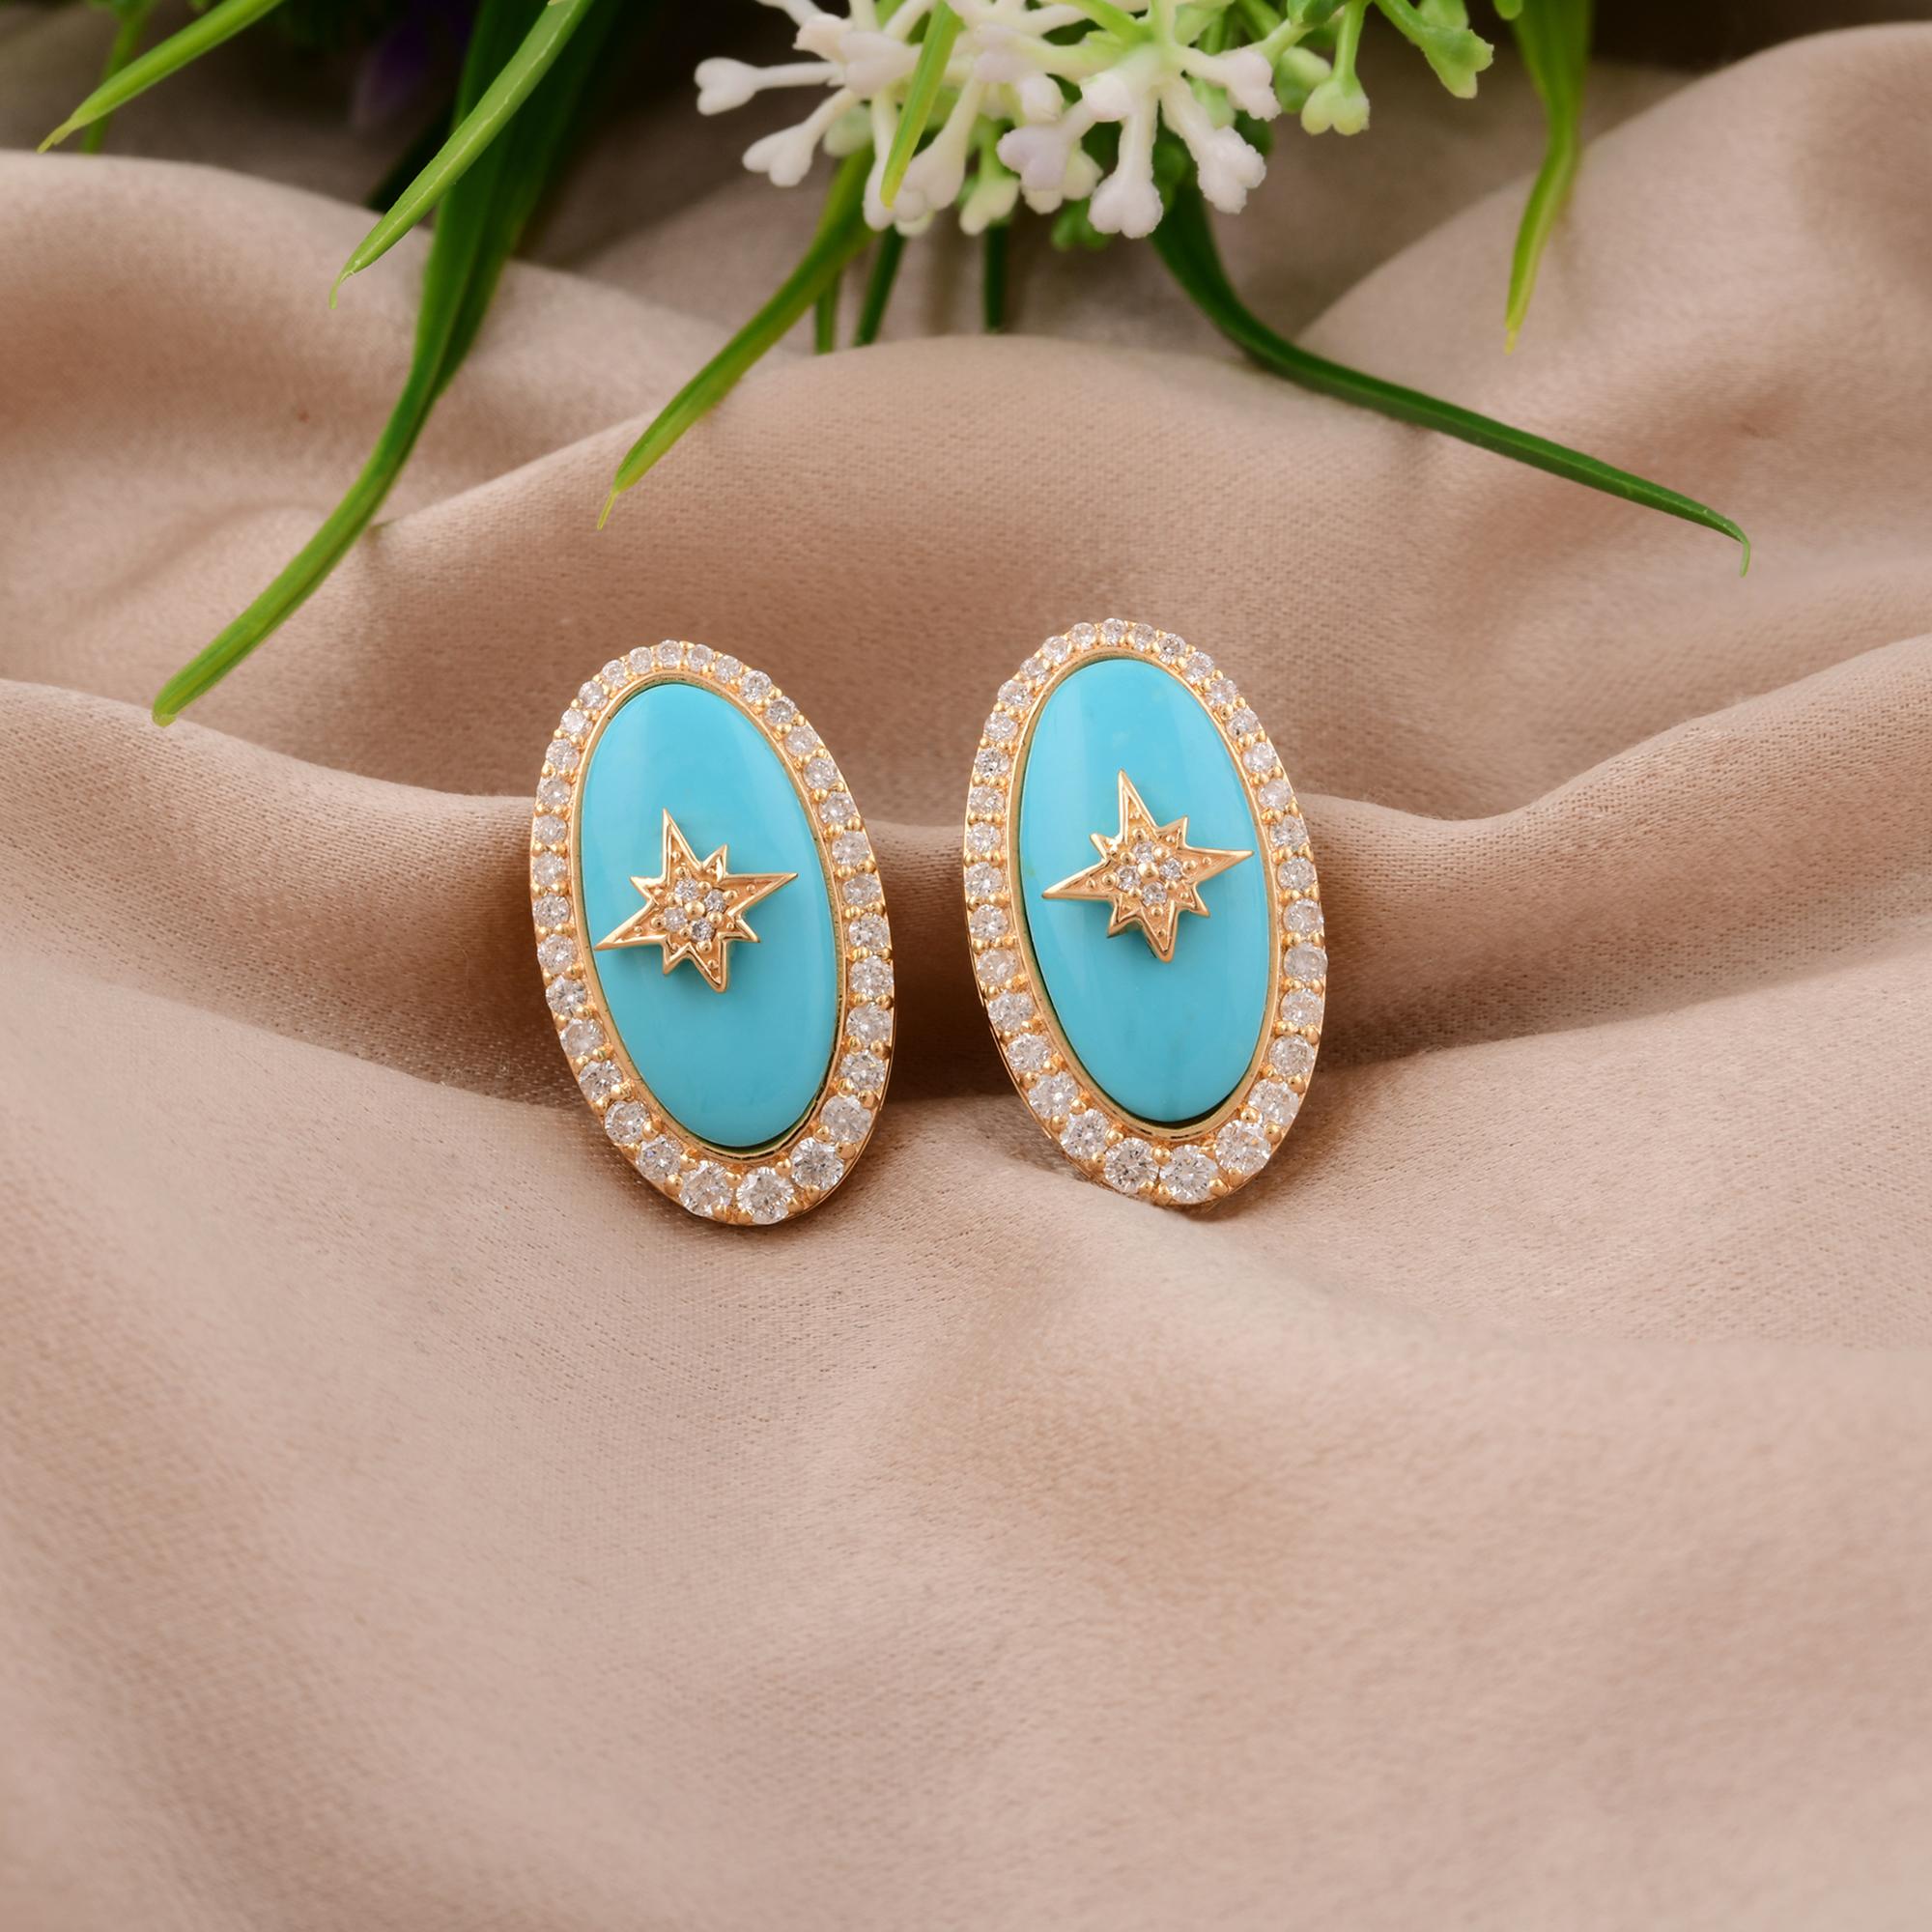 Oval Cut Natural Oval Turquoise Starburst Earrings Diamond 14 Karat Yellow Gold Jewelry For Sale